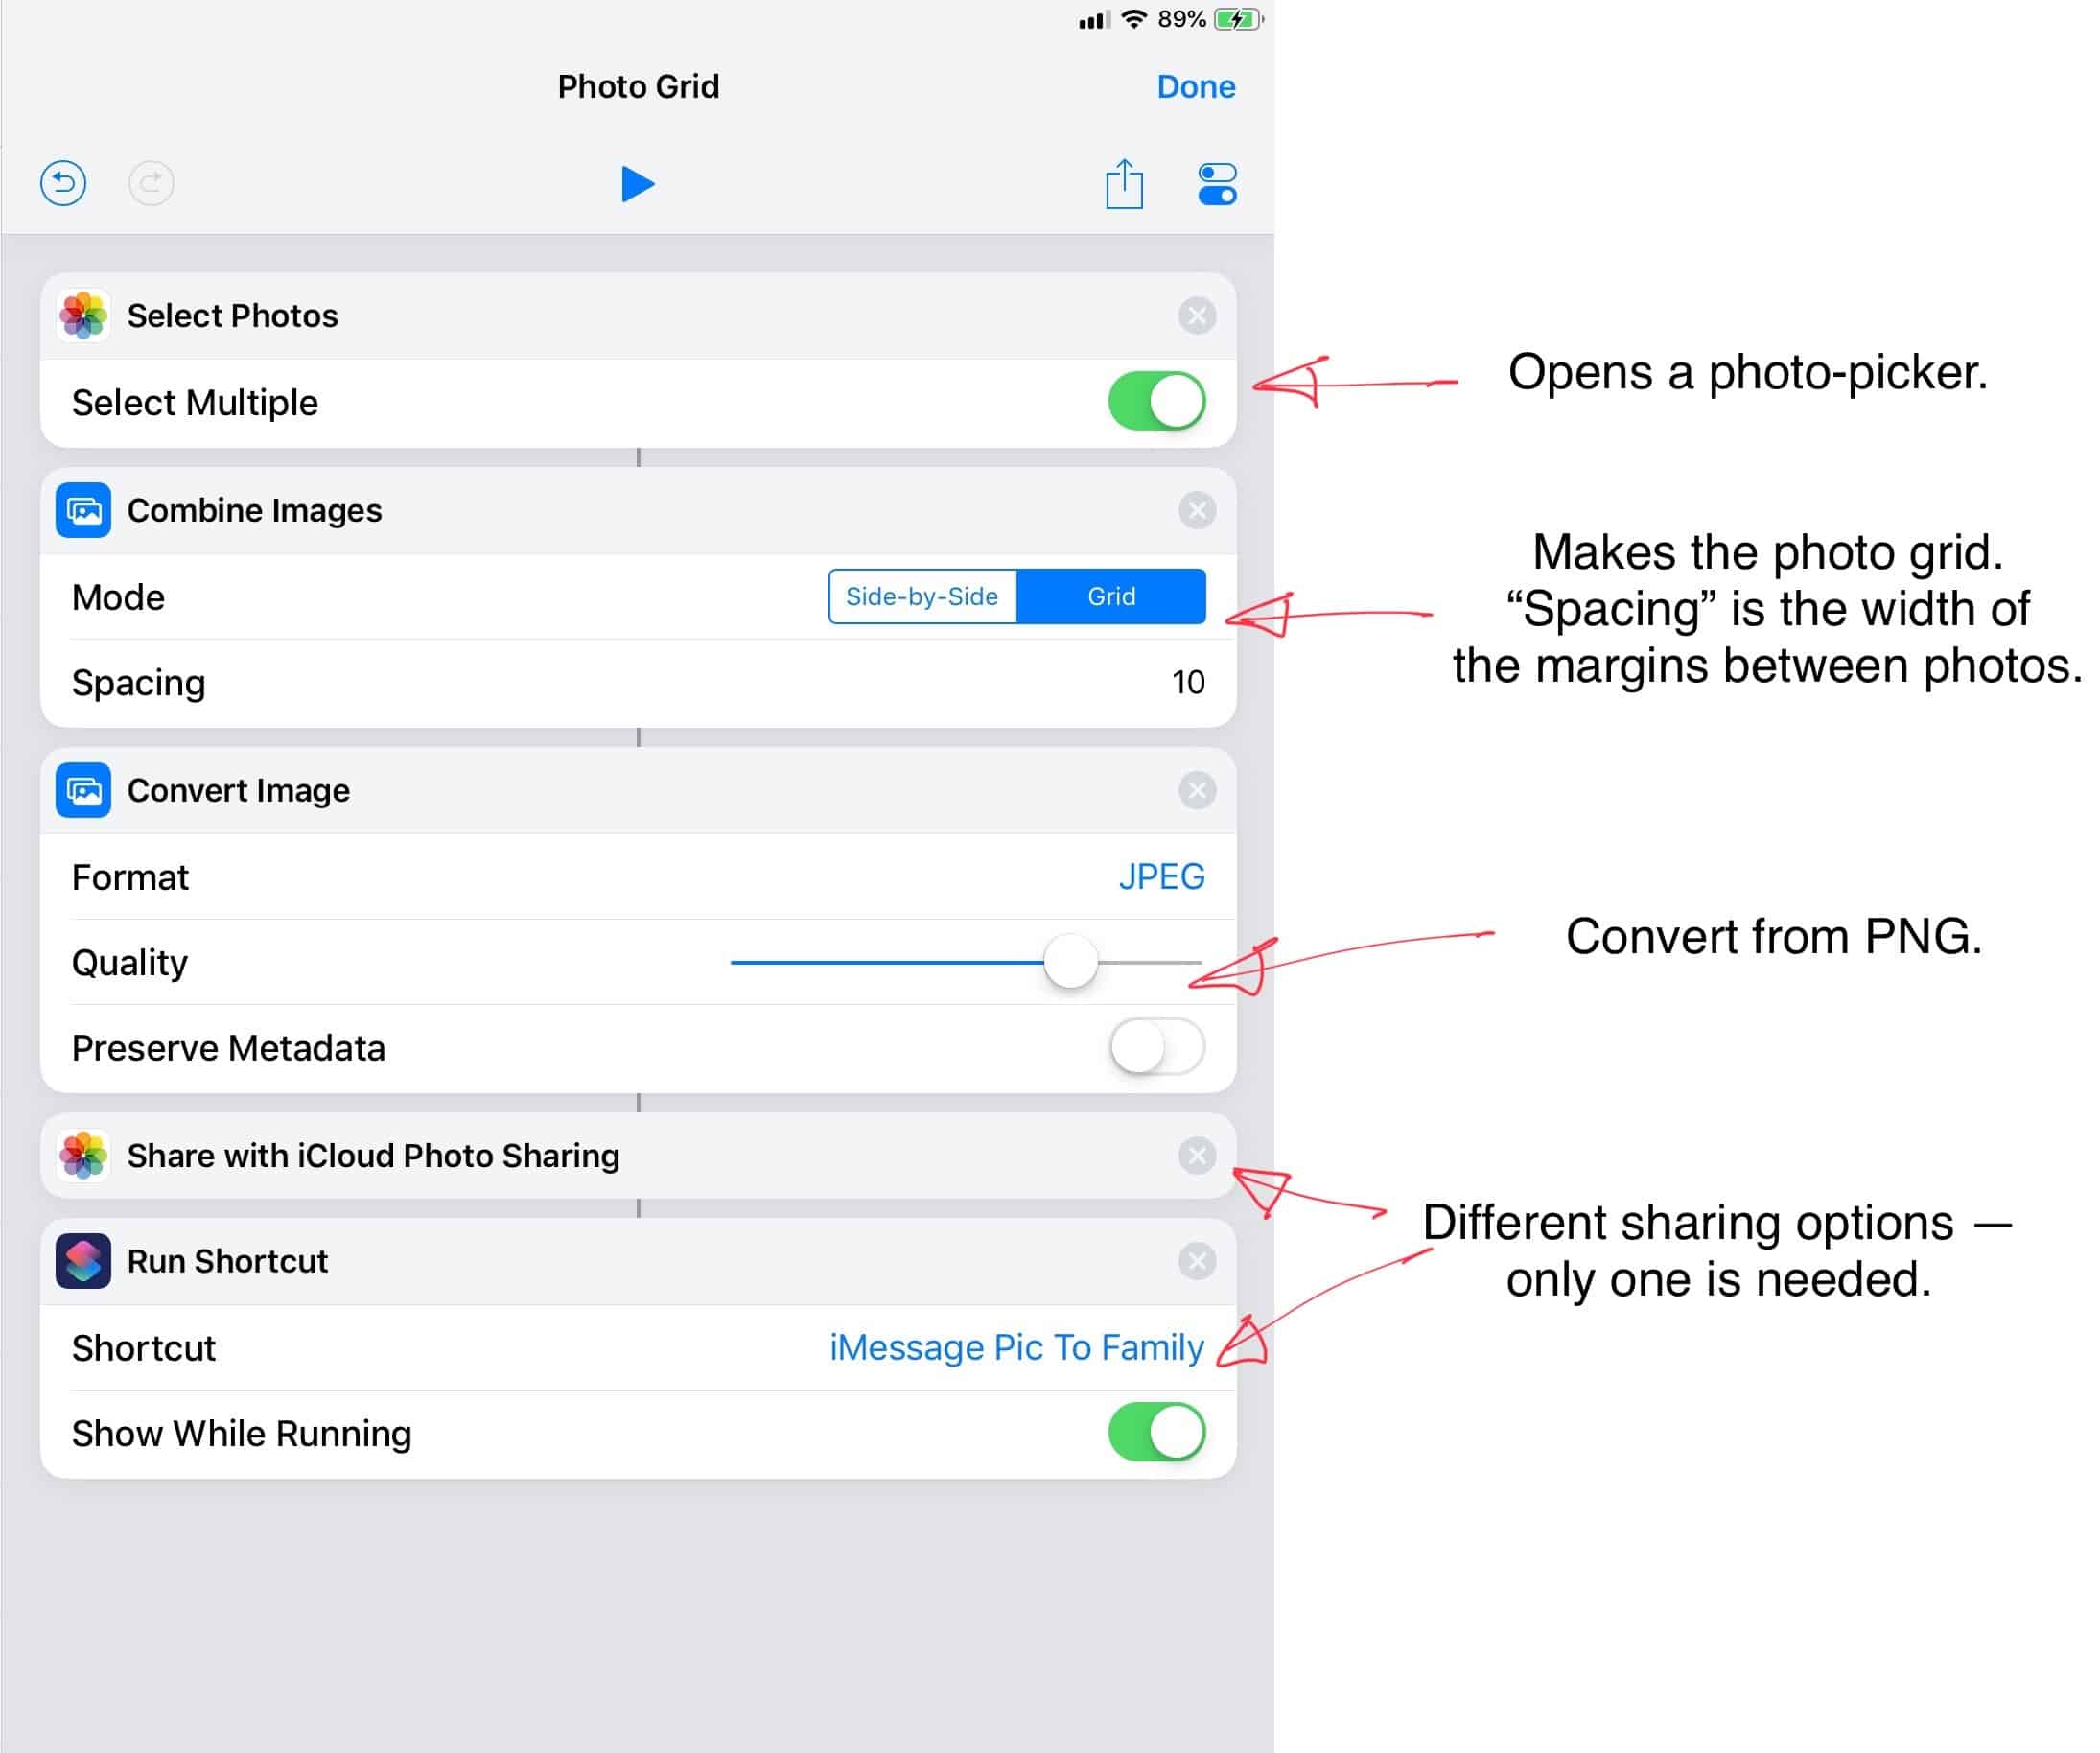 The photo grid shortcut is super easy.